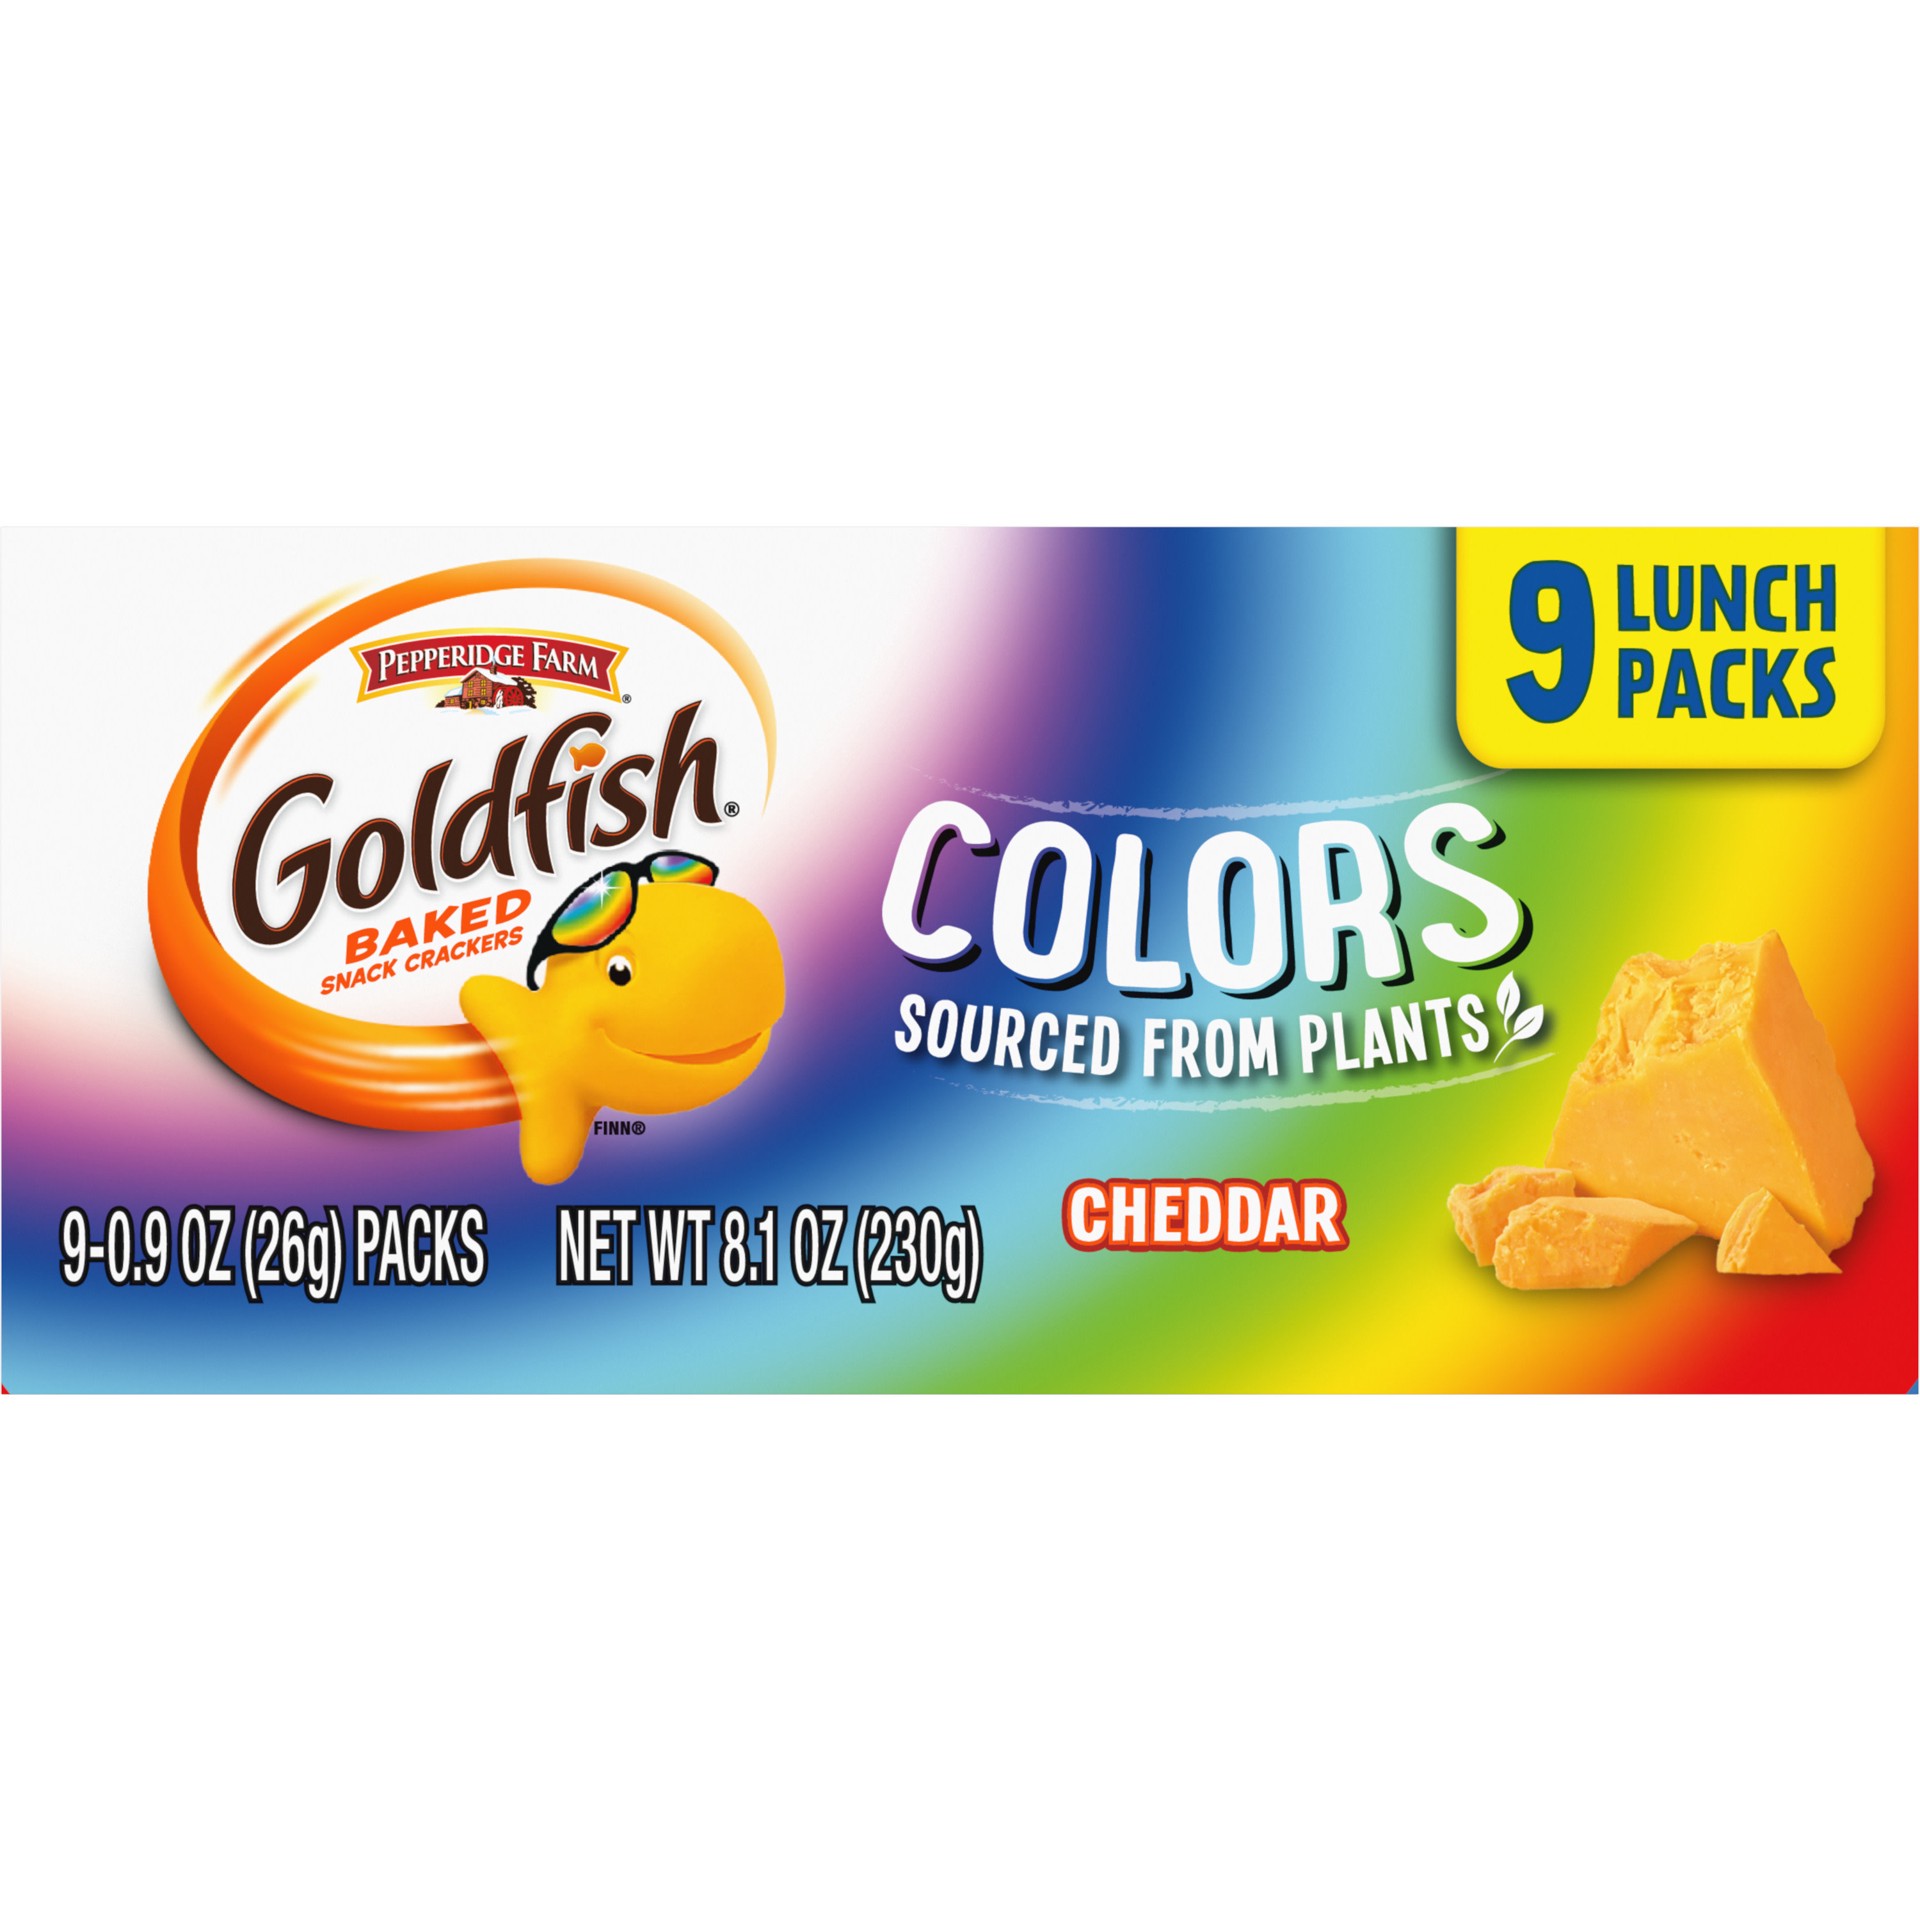 slide 6 of 9, Pepperidge Farm Goldfish Colors Cheddar Crackers, Snack Pack, 0.9 oz, 9 CT Multi-Pack Tray, 0.9 oz